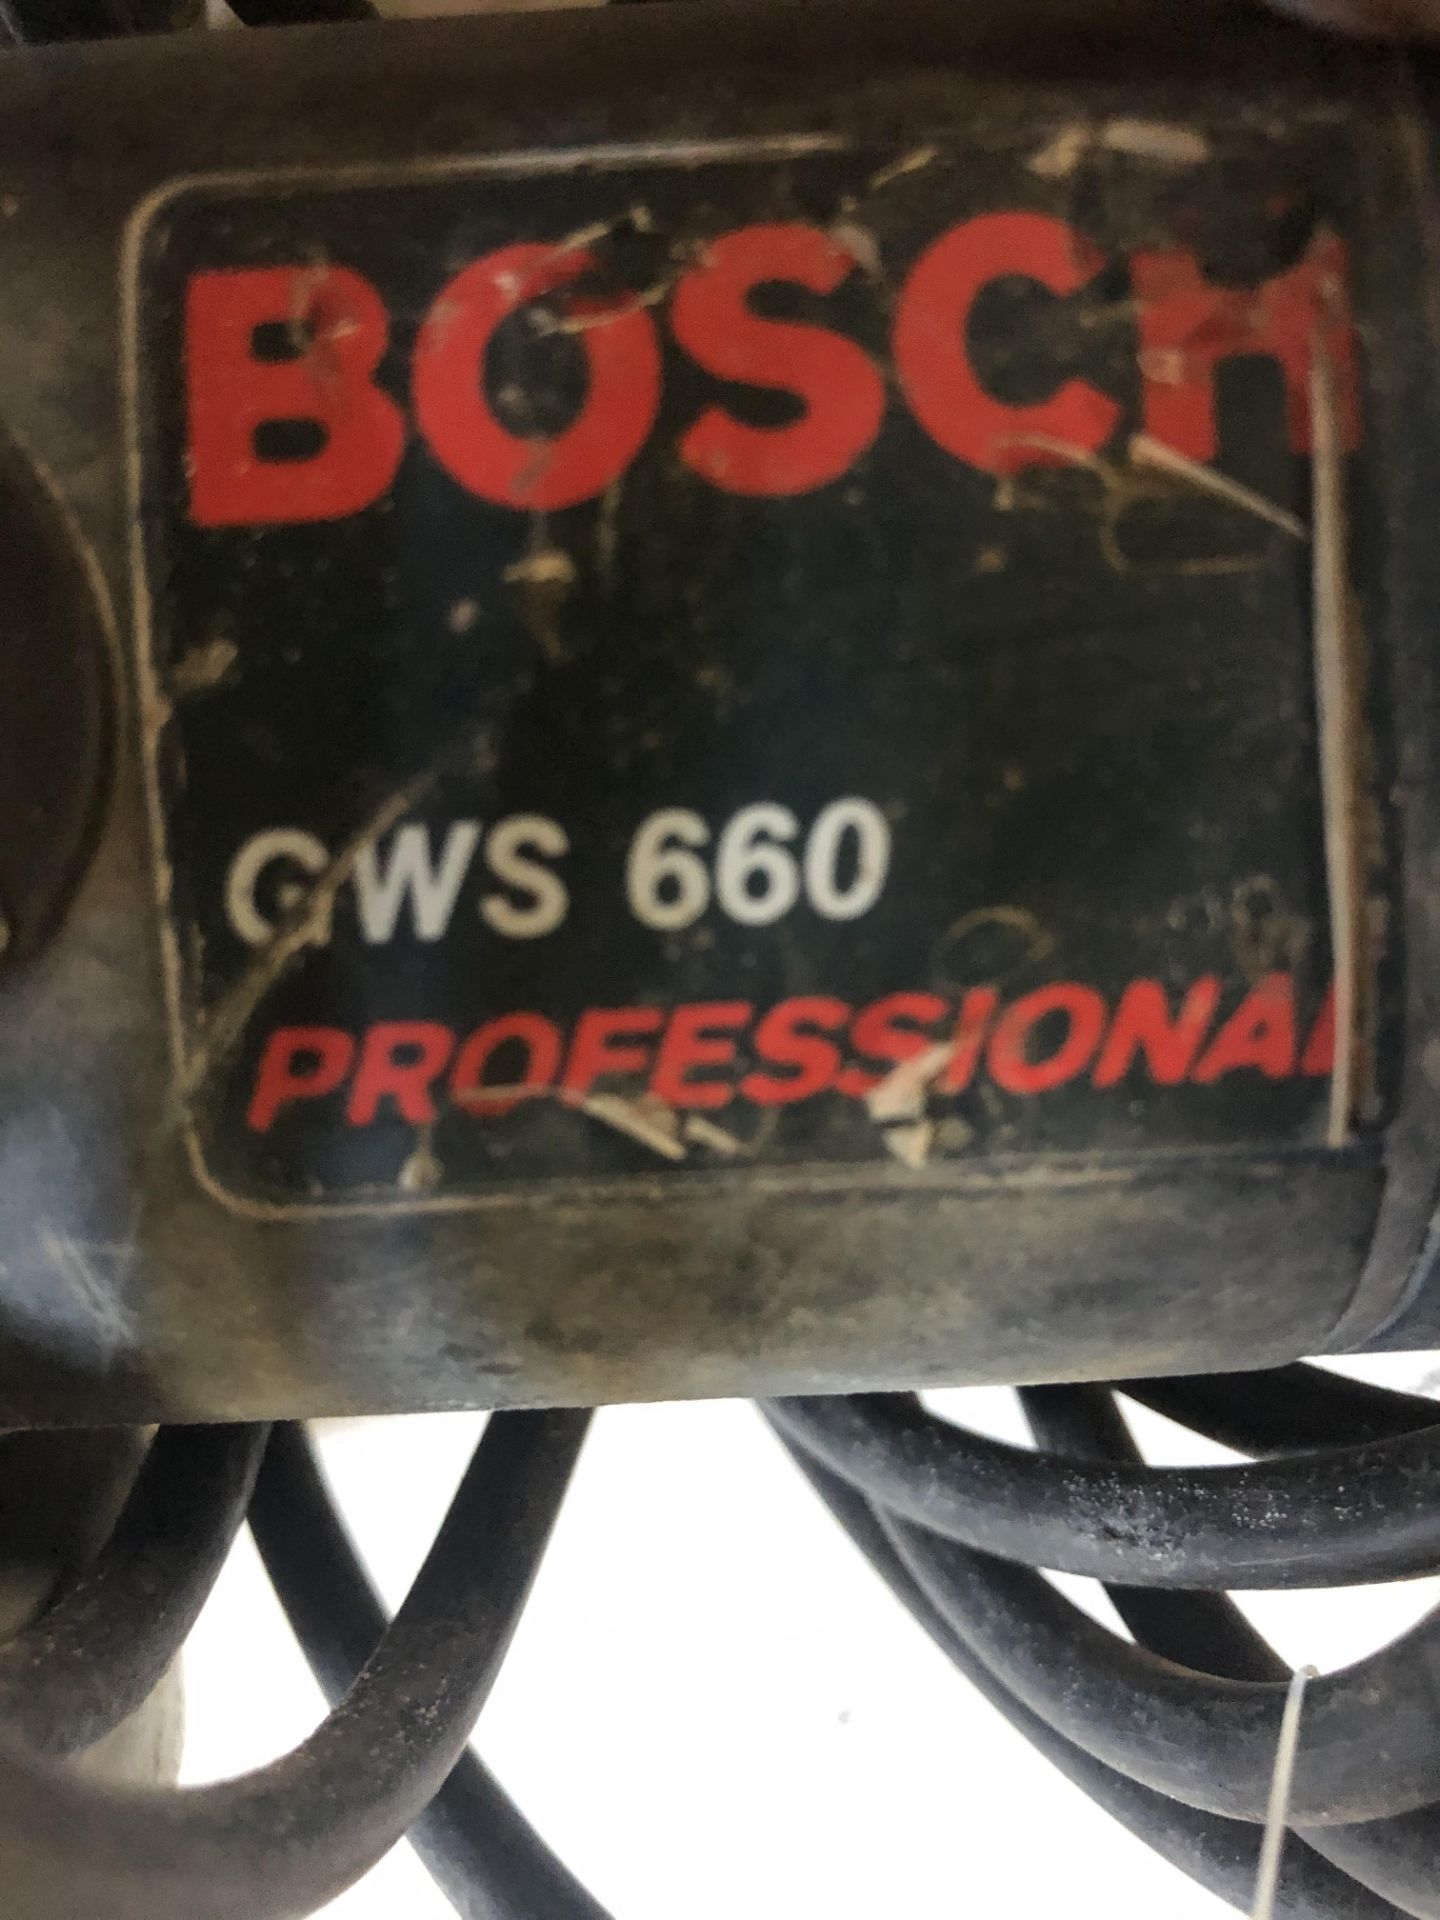 Bosch GWS660 Angle Grinder - Image 2 of 2